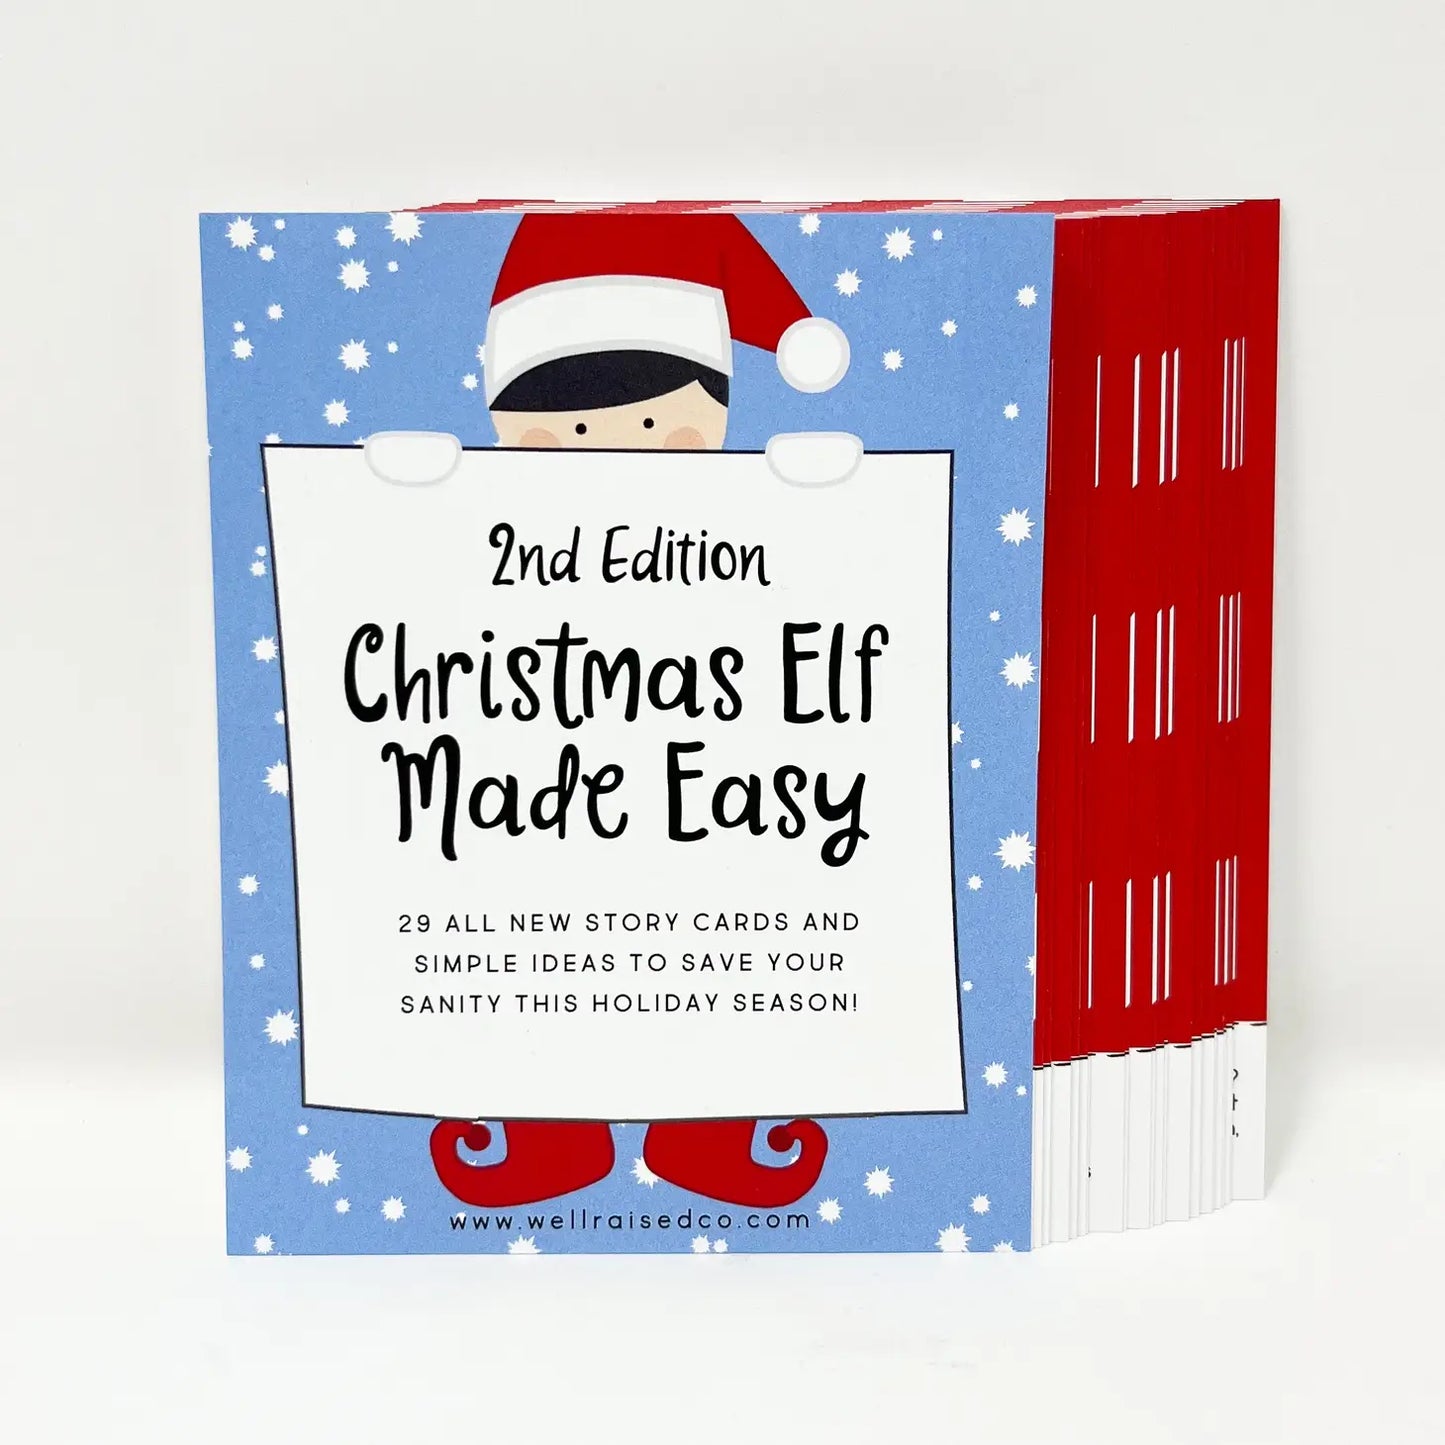 Load image into Gallery viewer, Christmas Elf Made Easy 2nd Edition Cards
